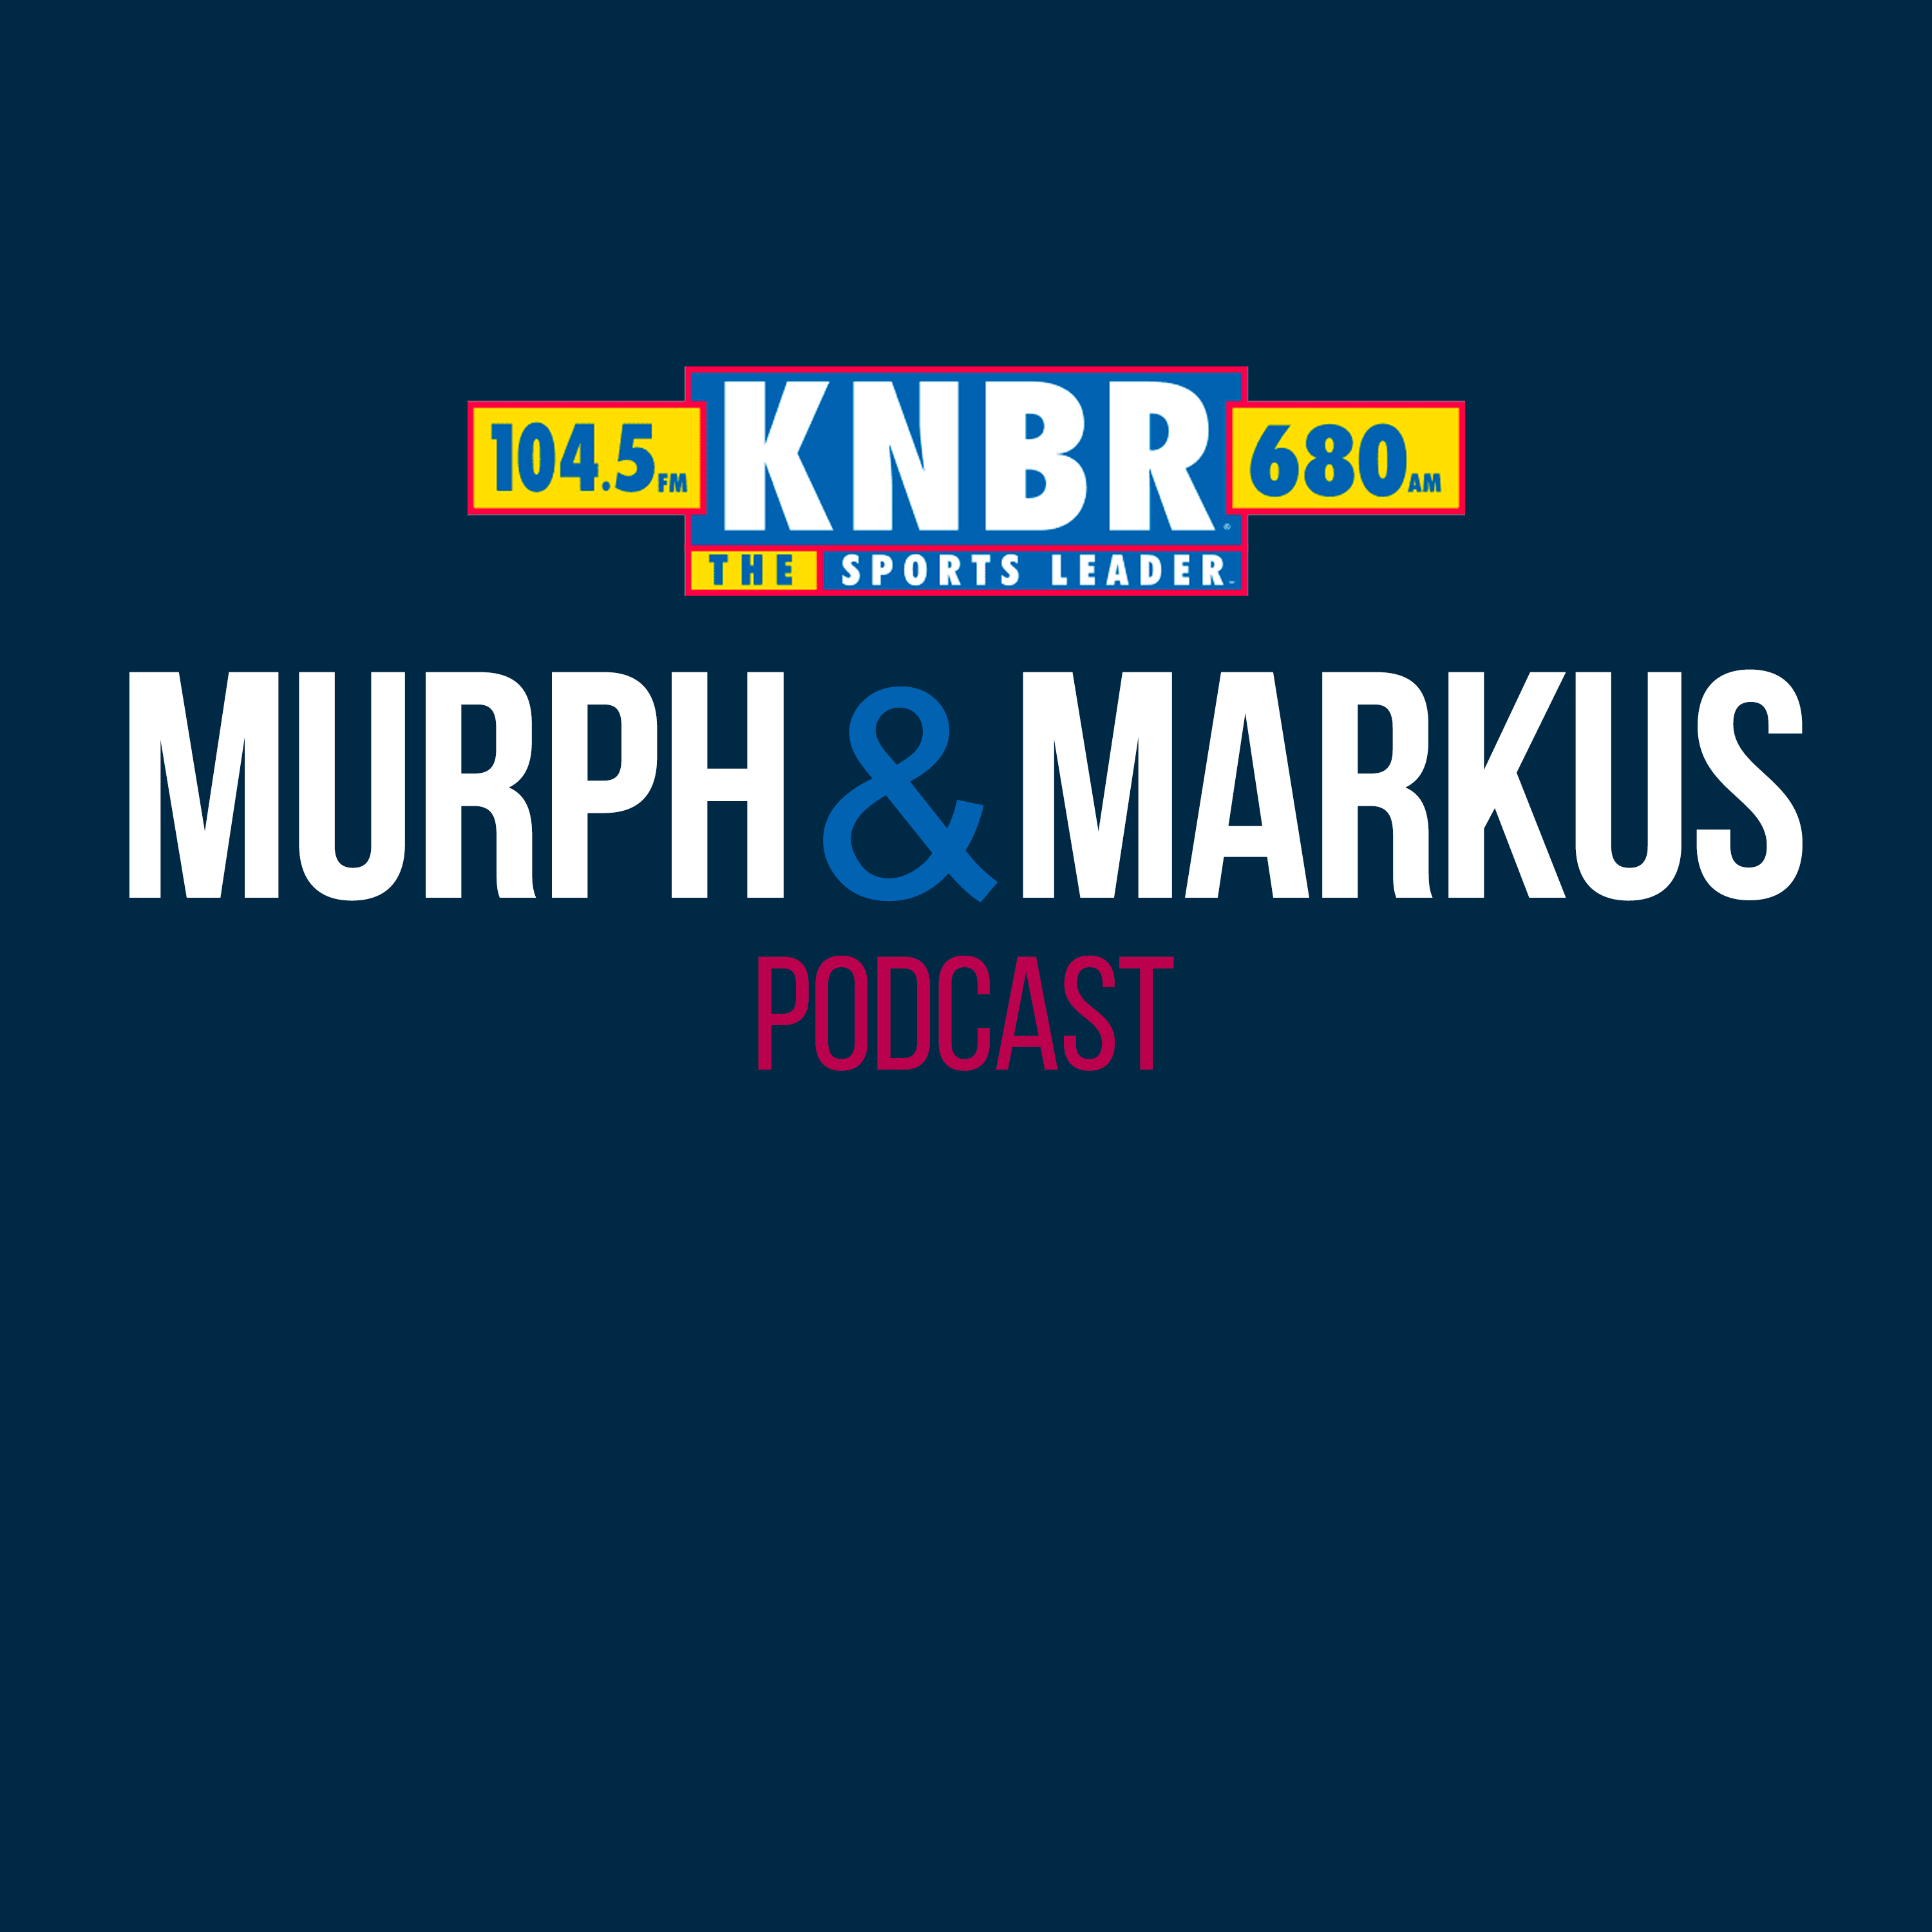 5-24 Hour 2: Murph & Markus react to Brandon Staley's comments about his new role with the 49ers, then talk to Mike Krukow and Pat Burrell